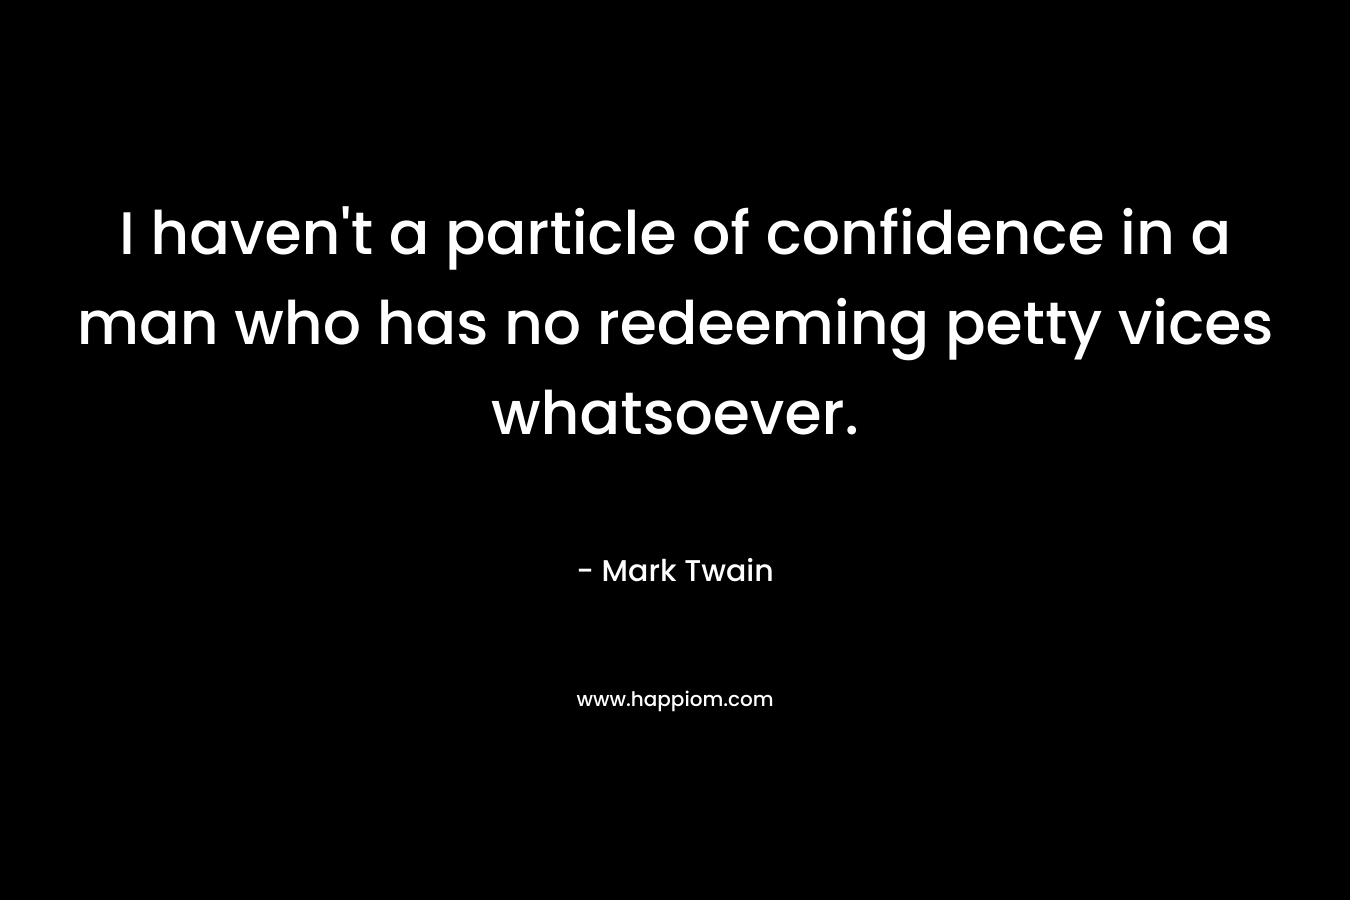 I haven’t a particle of confidence in a man who has no redeeming petty vices whatsoever. – Mark Twain